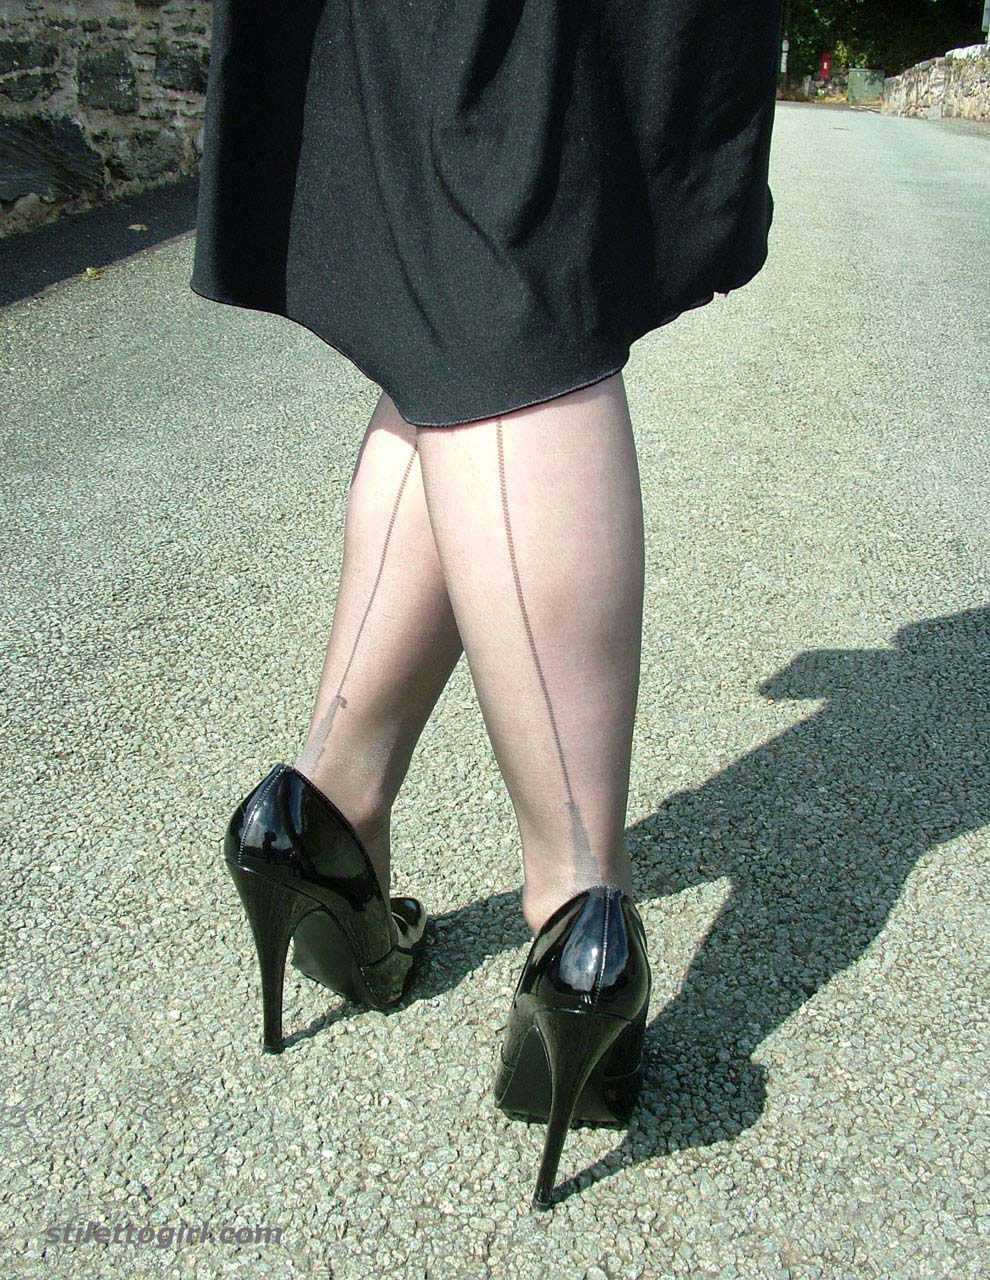 lady in heels and pantyhose